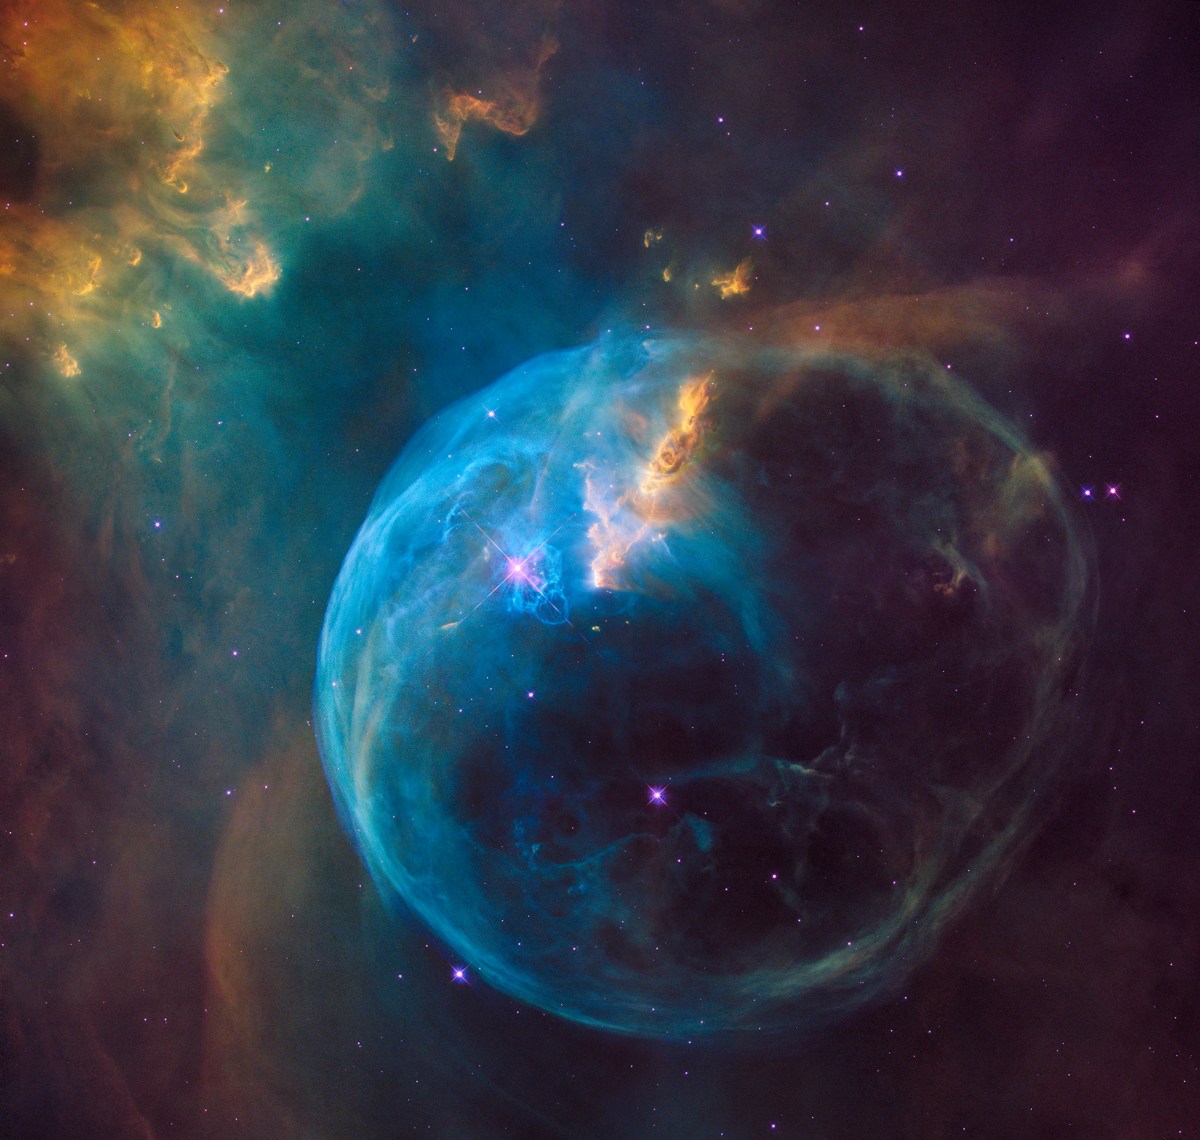 The Bubble Nebula, also known as NGC 7635, is an emission nebula located 8 000 light-years away. This stunning new image was observed by the NASA/ESA Hubble Space Telescope to celebrate its 26th year in space.